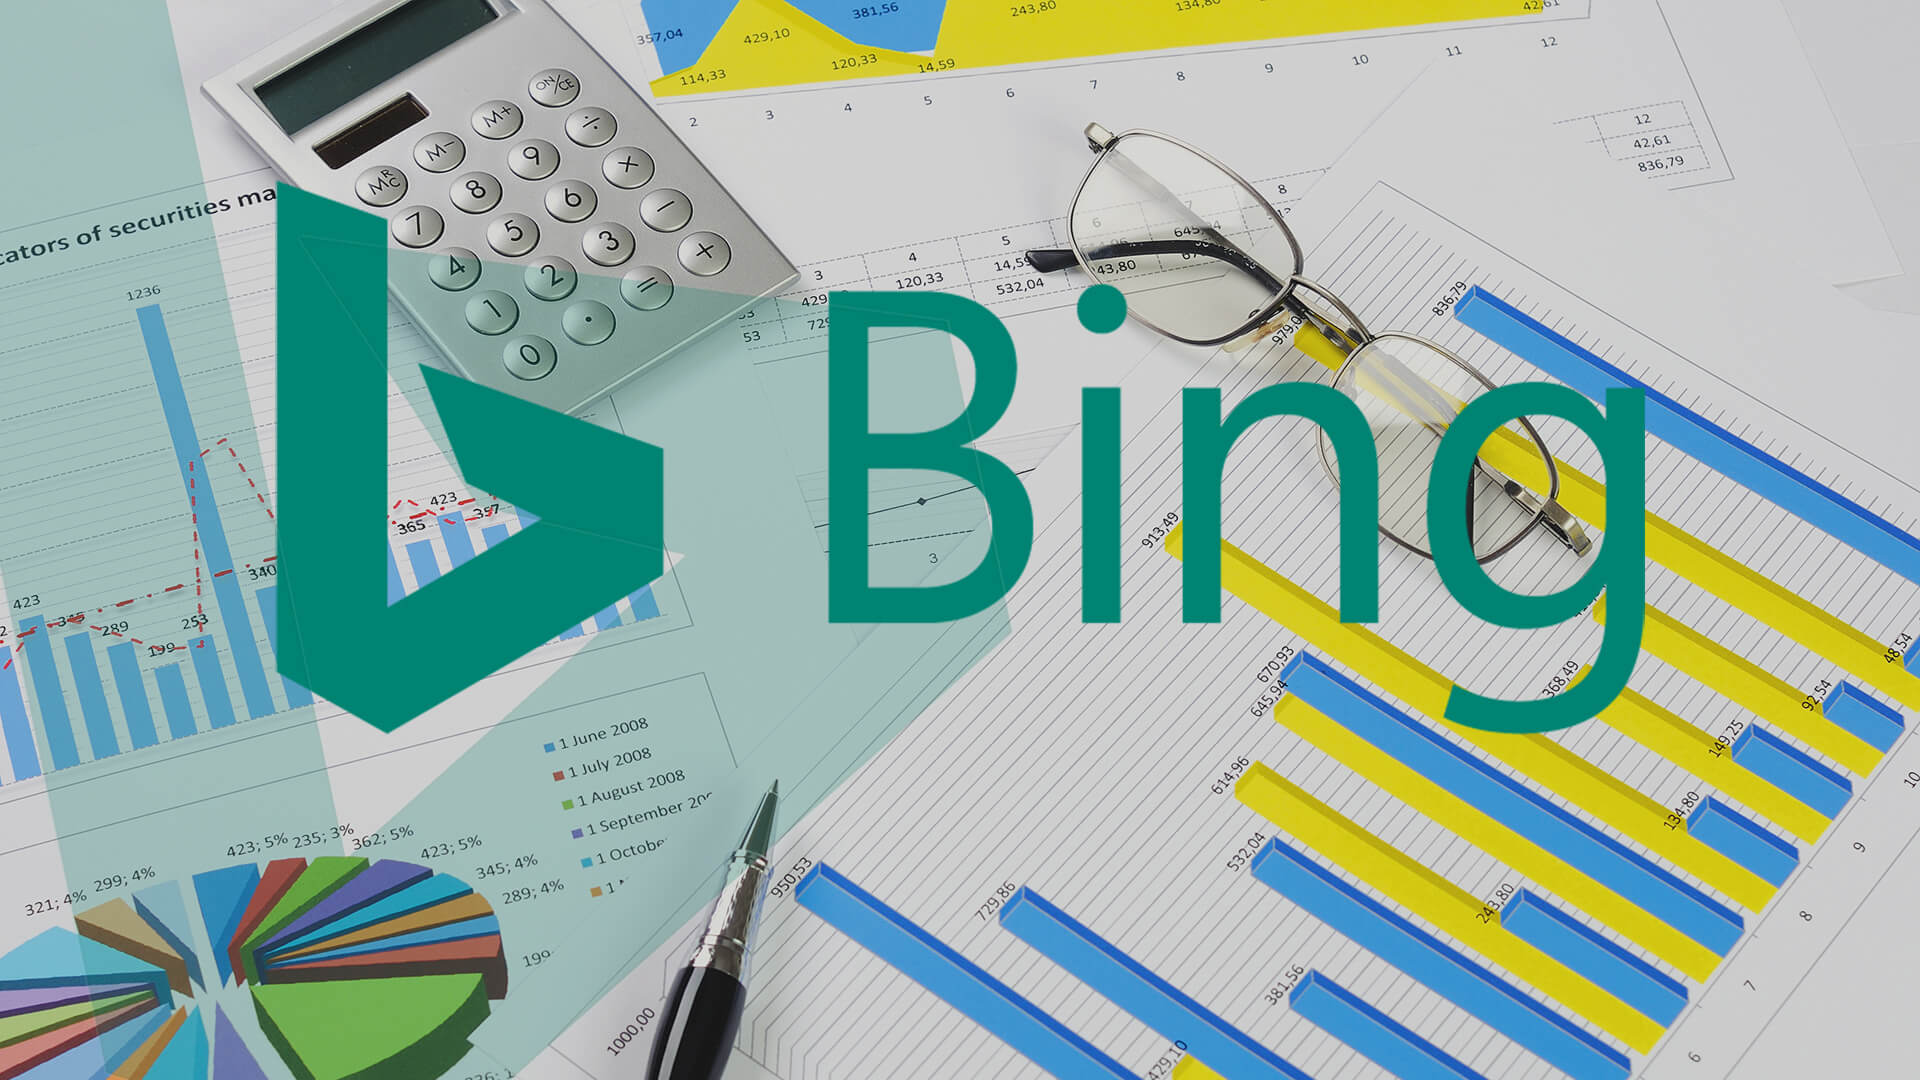 Bing launches new portal for URL and content submission APIs